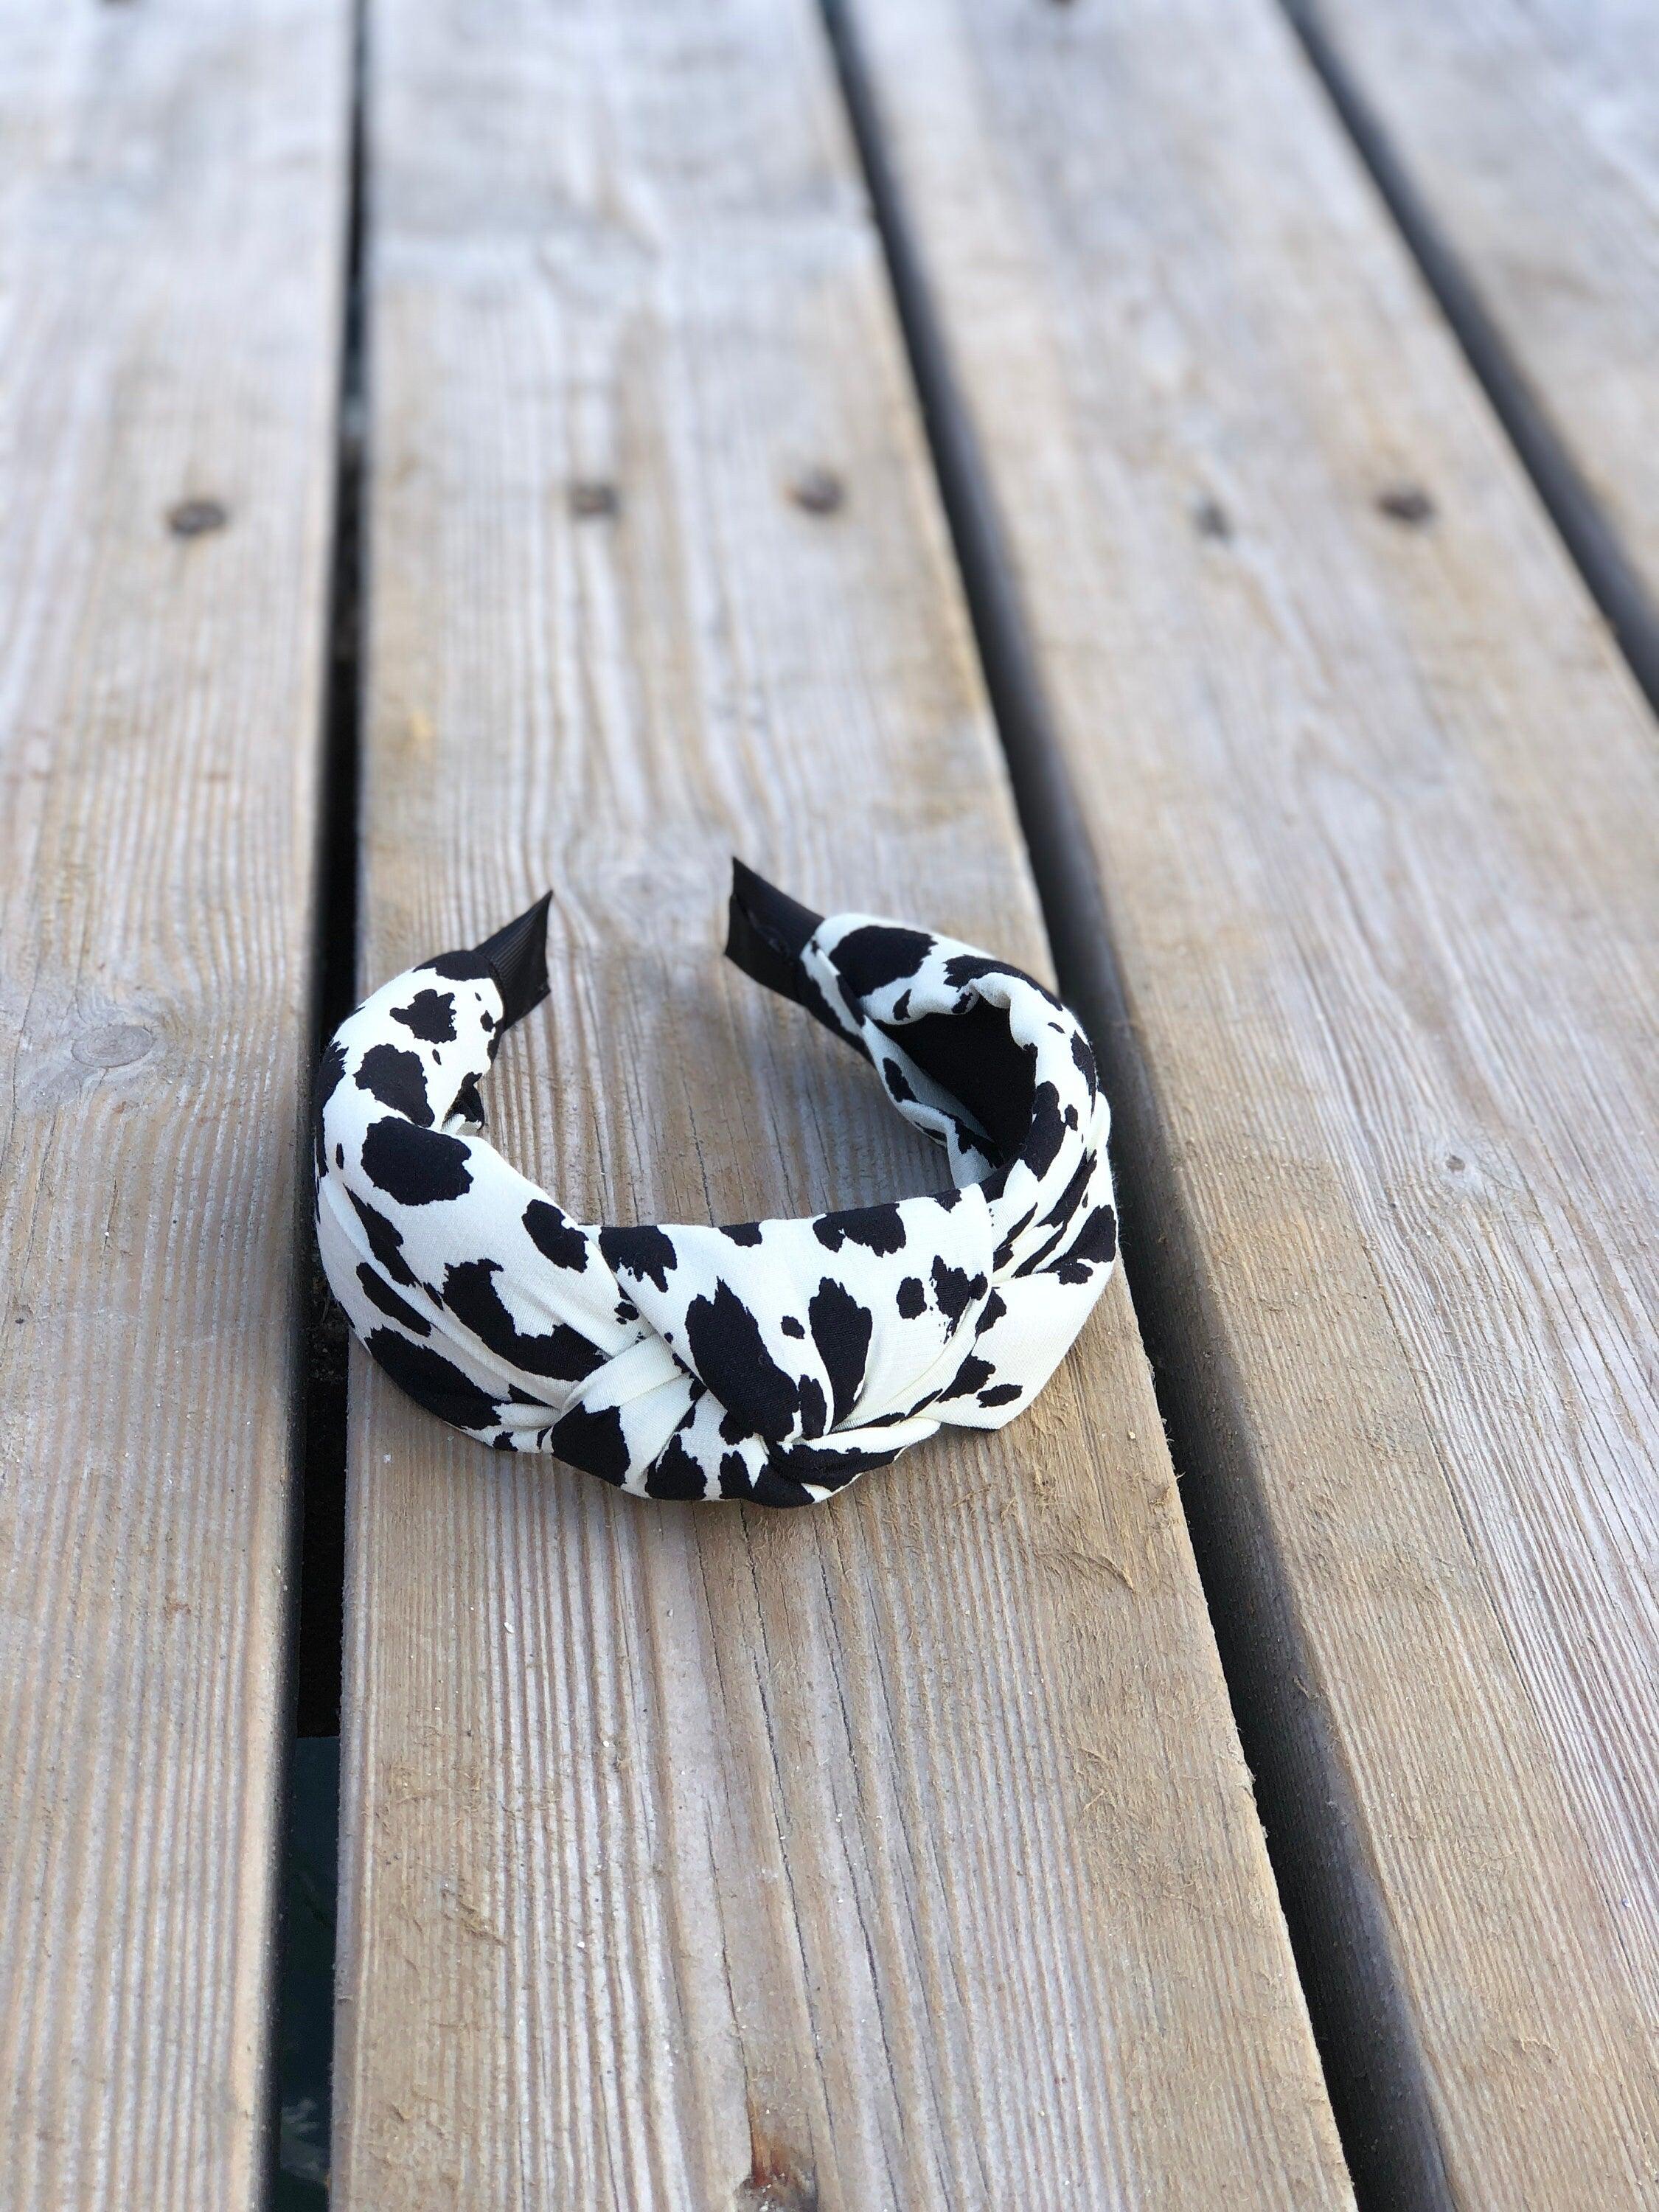 Elegant White Leopard Headband - Stylish African-Inspired Spotted Cotton Headband with Wide Design and Black Bow Accent available at Moyoni Design